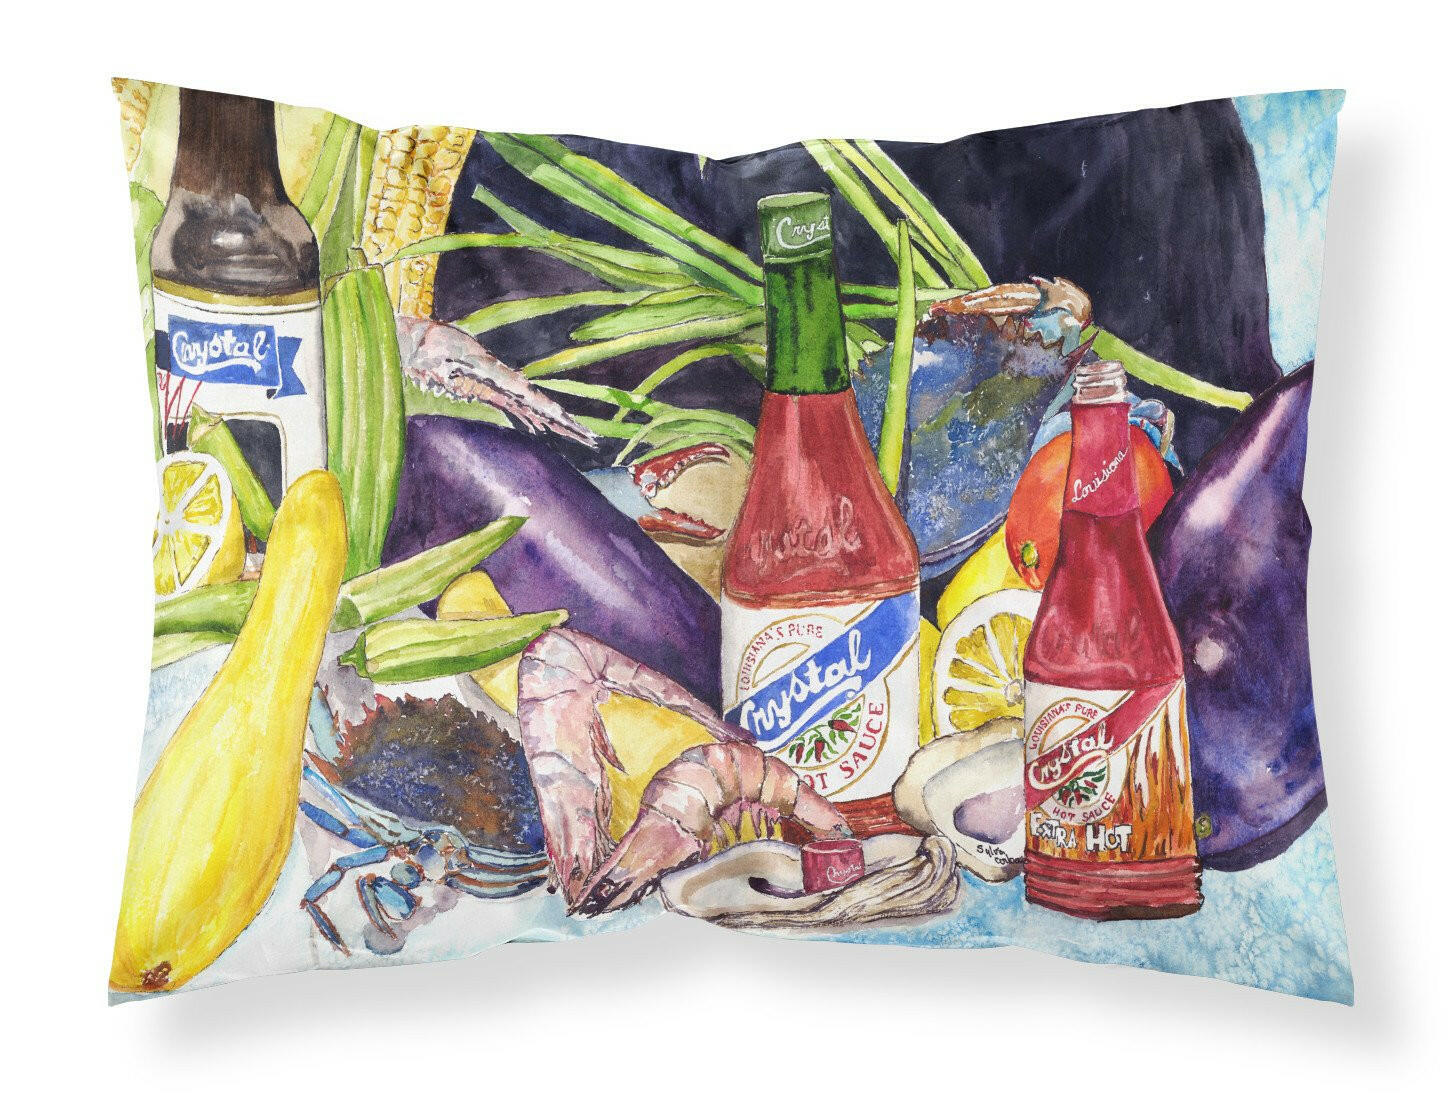 Crystal Hot Sauce with Seafood Fabric Standard Pillowcase 8637PILLOWCASE by Caroline's Treasures